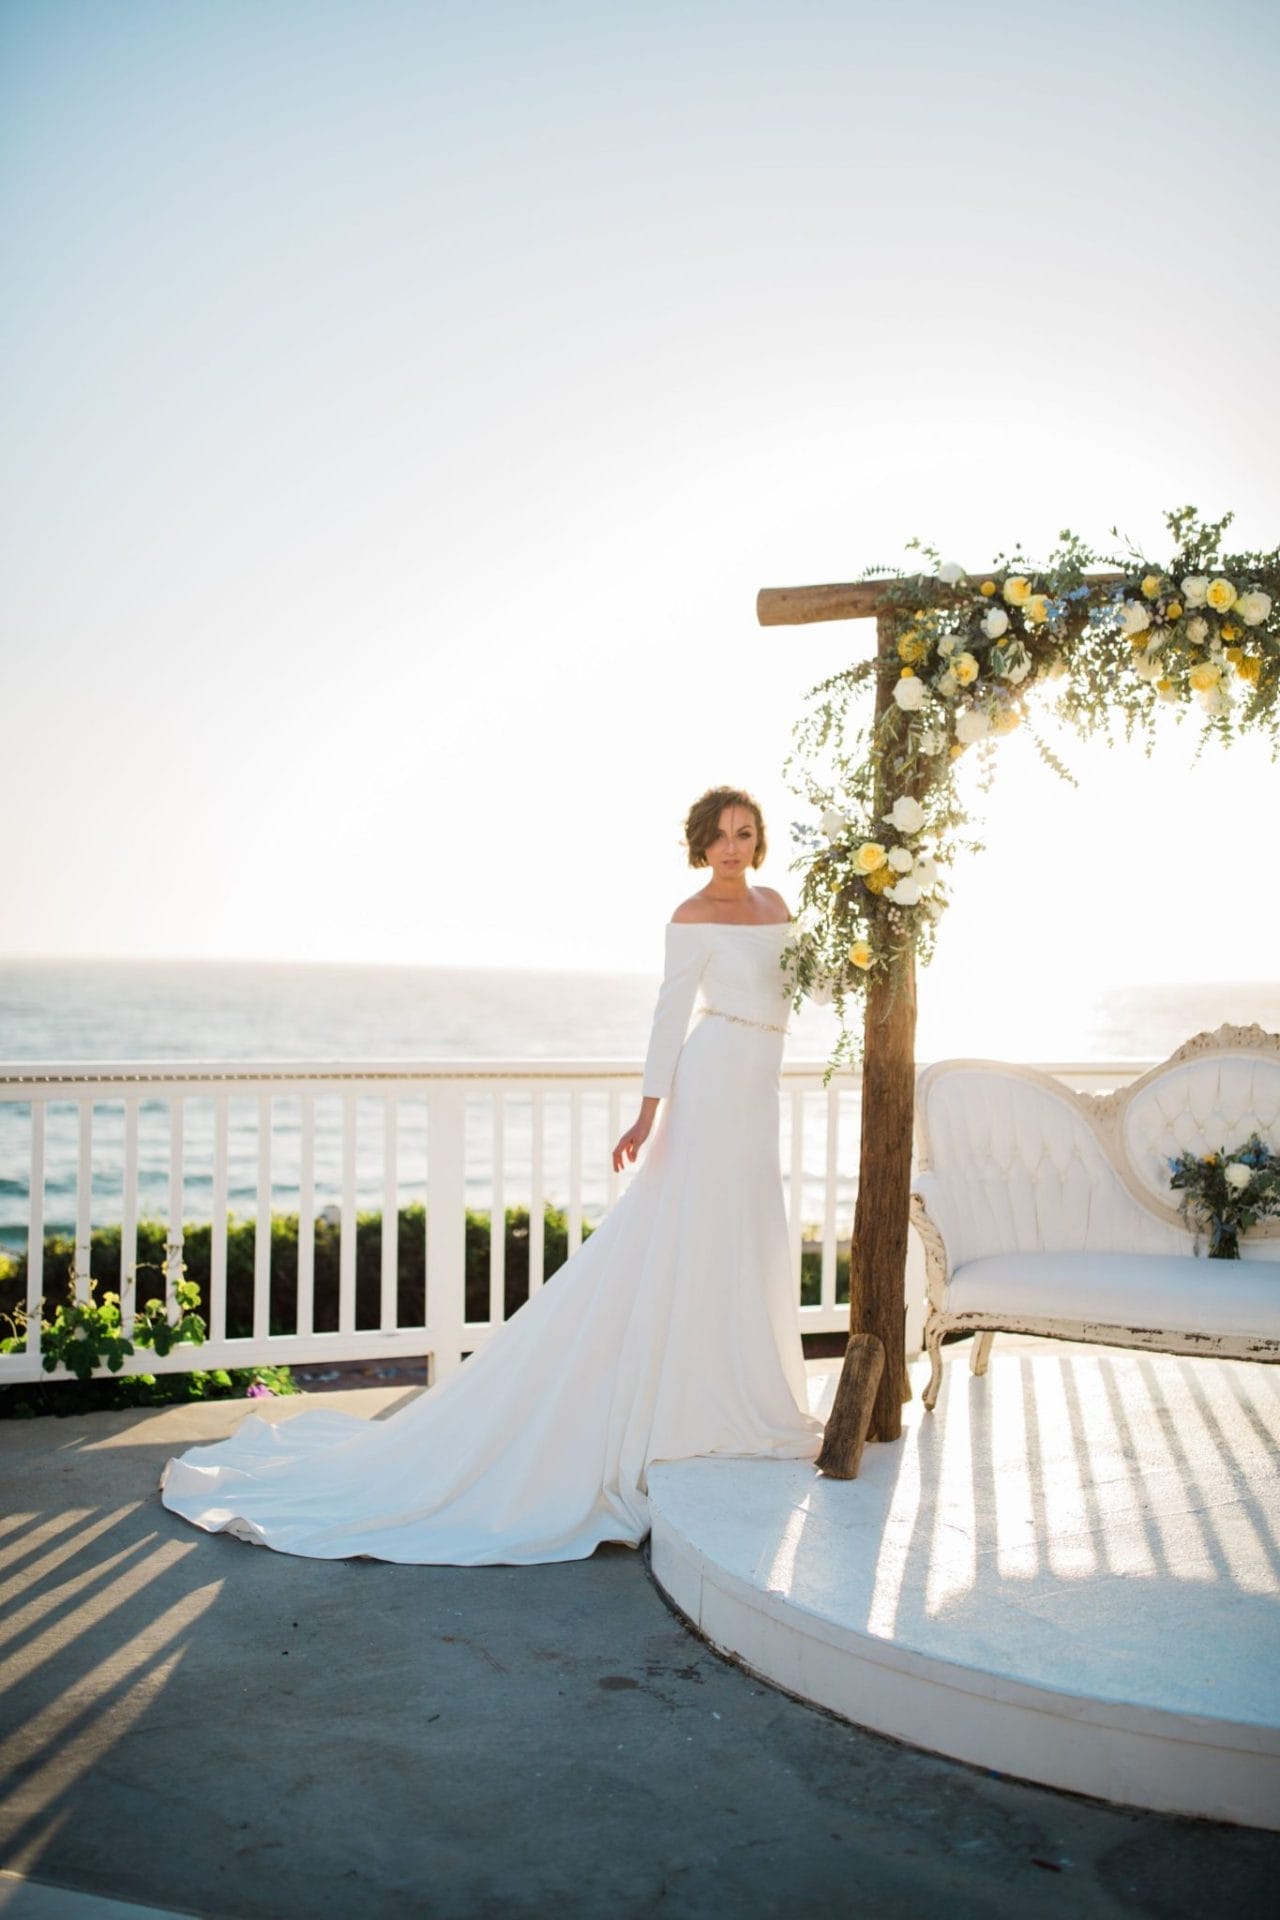 A bride in a white wedding dress standing in front of a wooden arch on the beach, making for a picturesque setting for Southern California weddings.